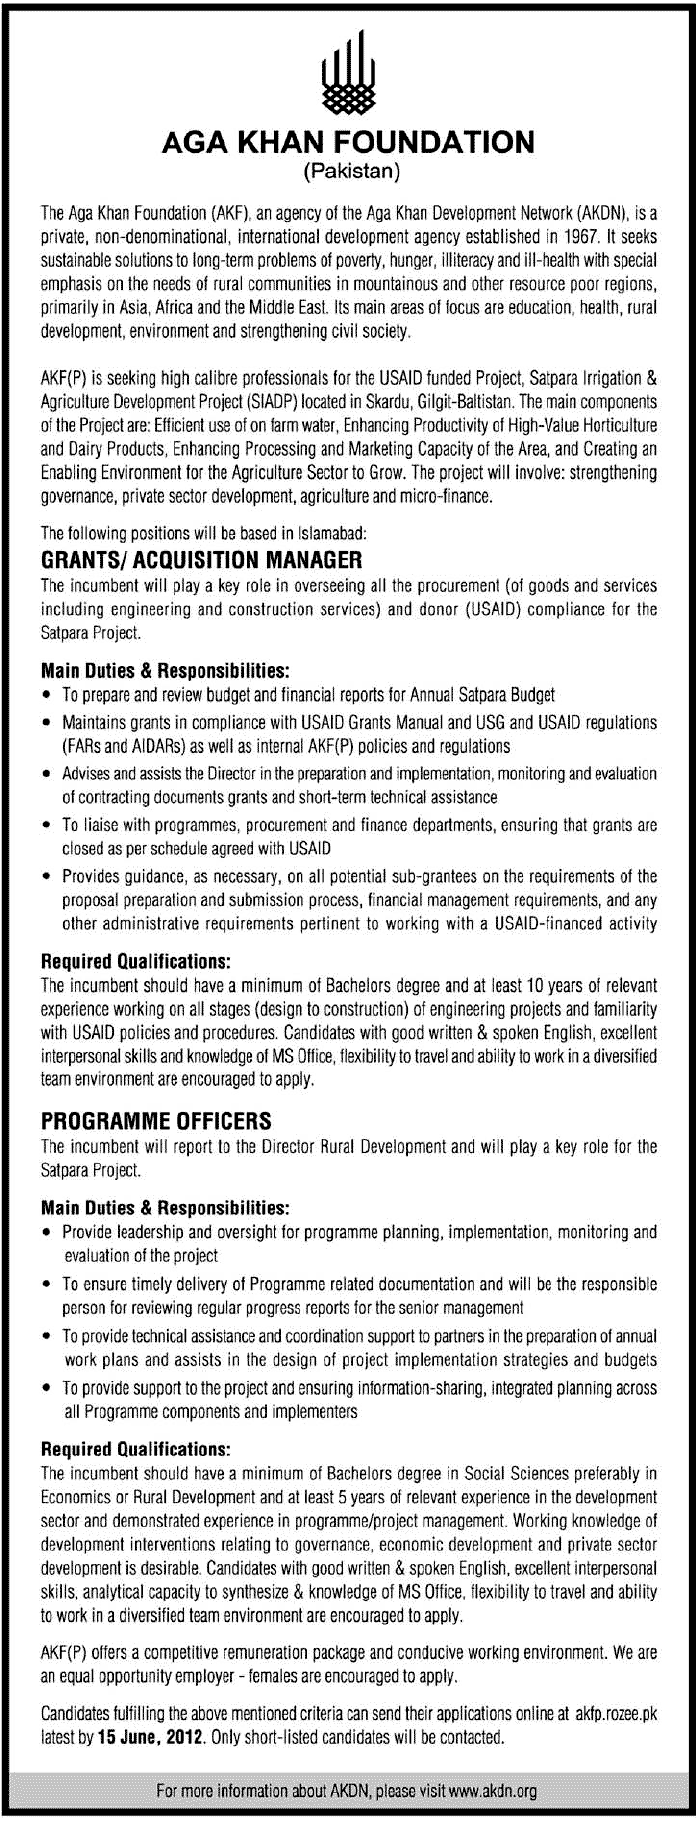 Manager and Programme Officer Required at AGA Khan Foundation (AKF)